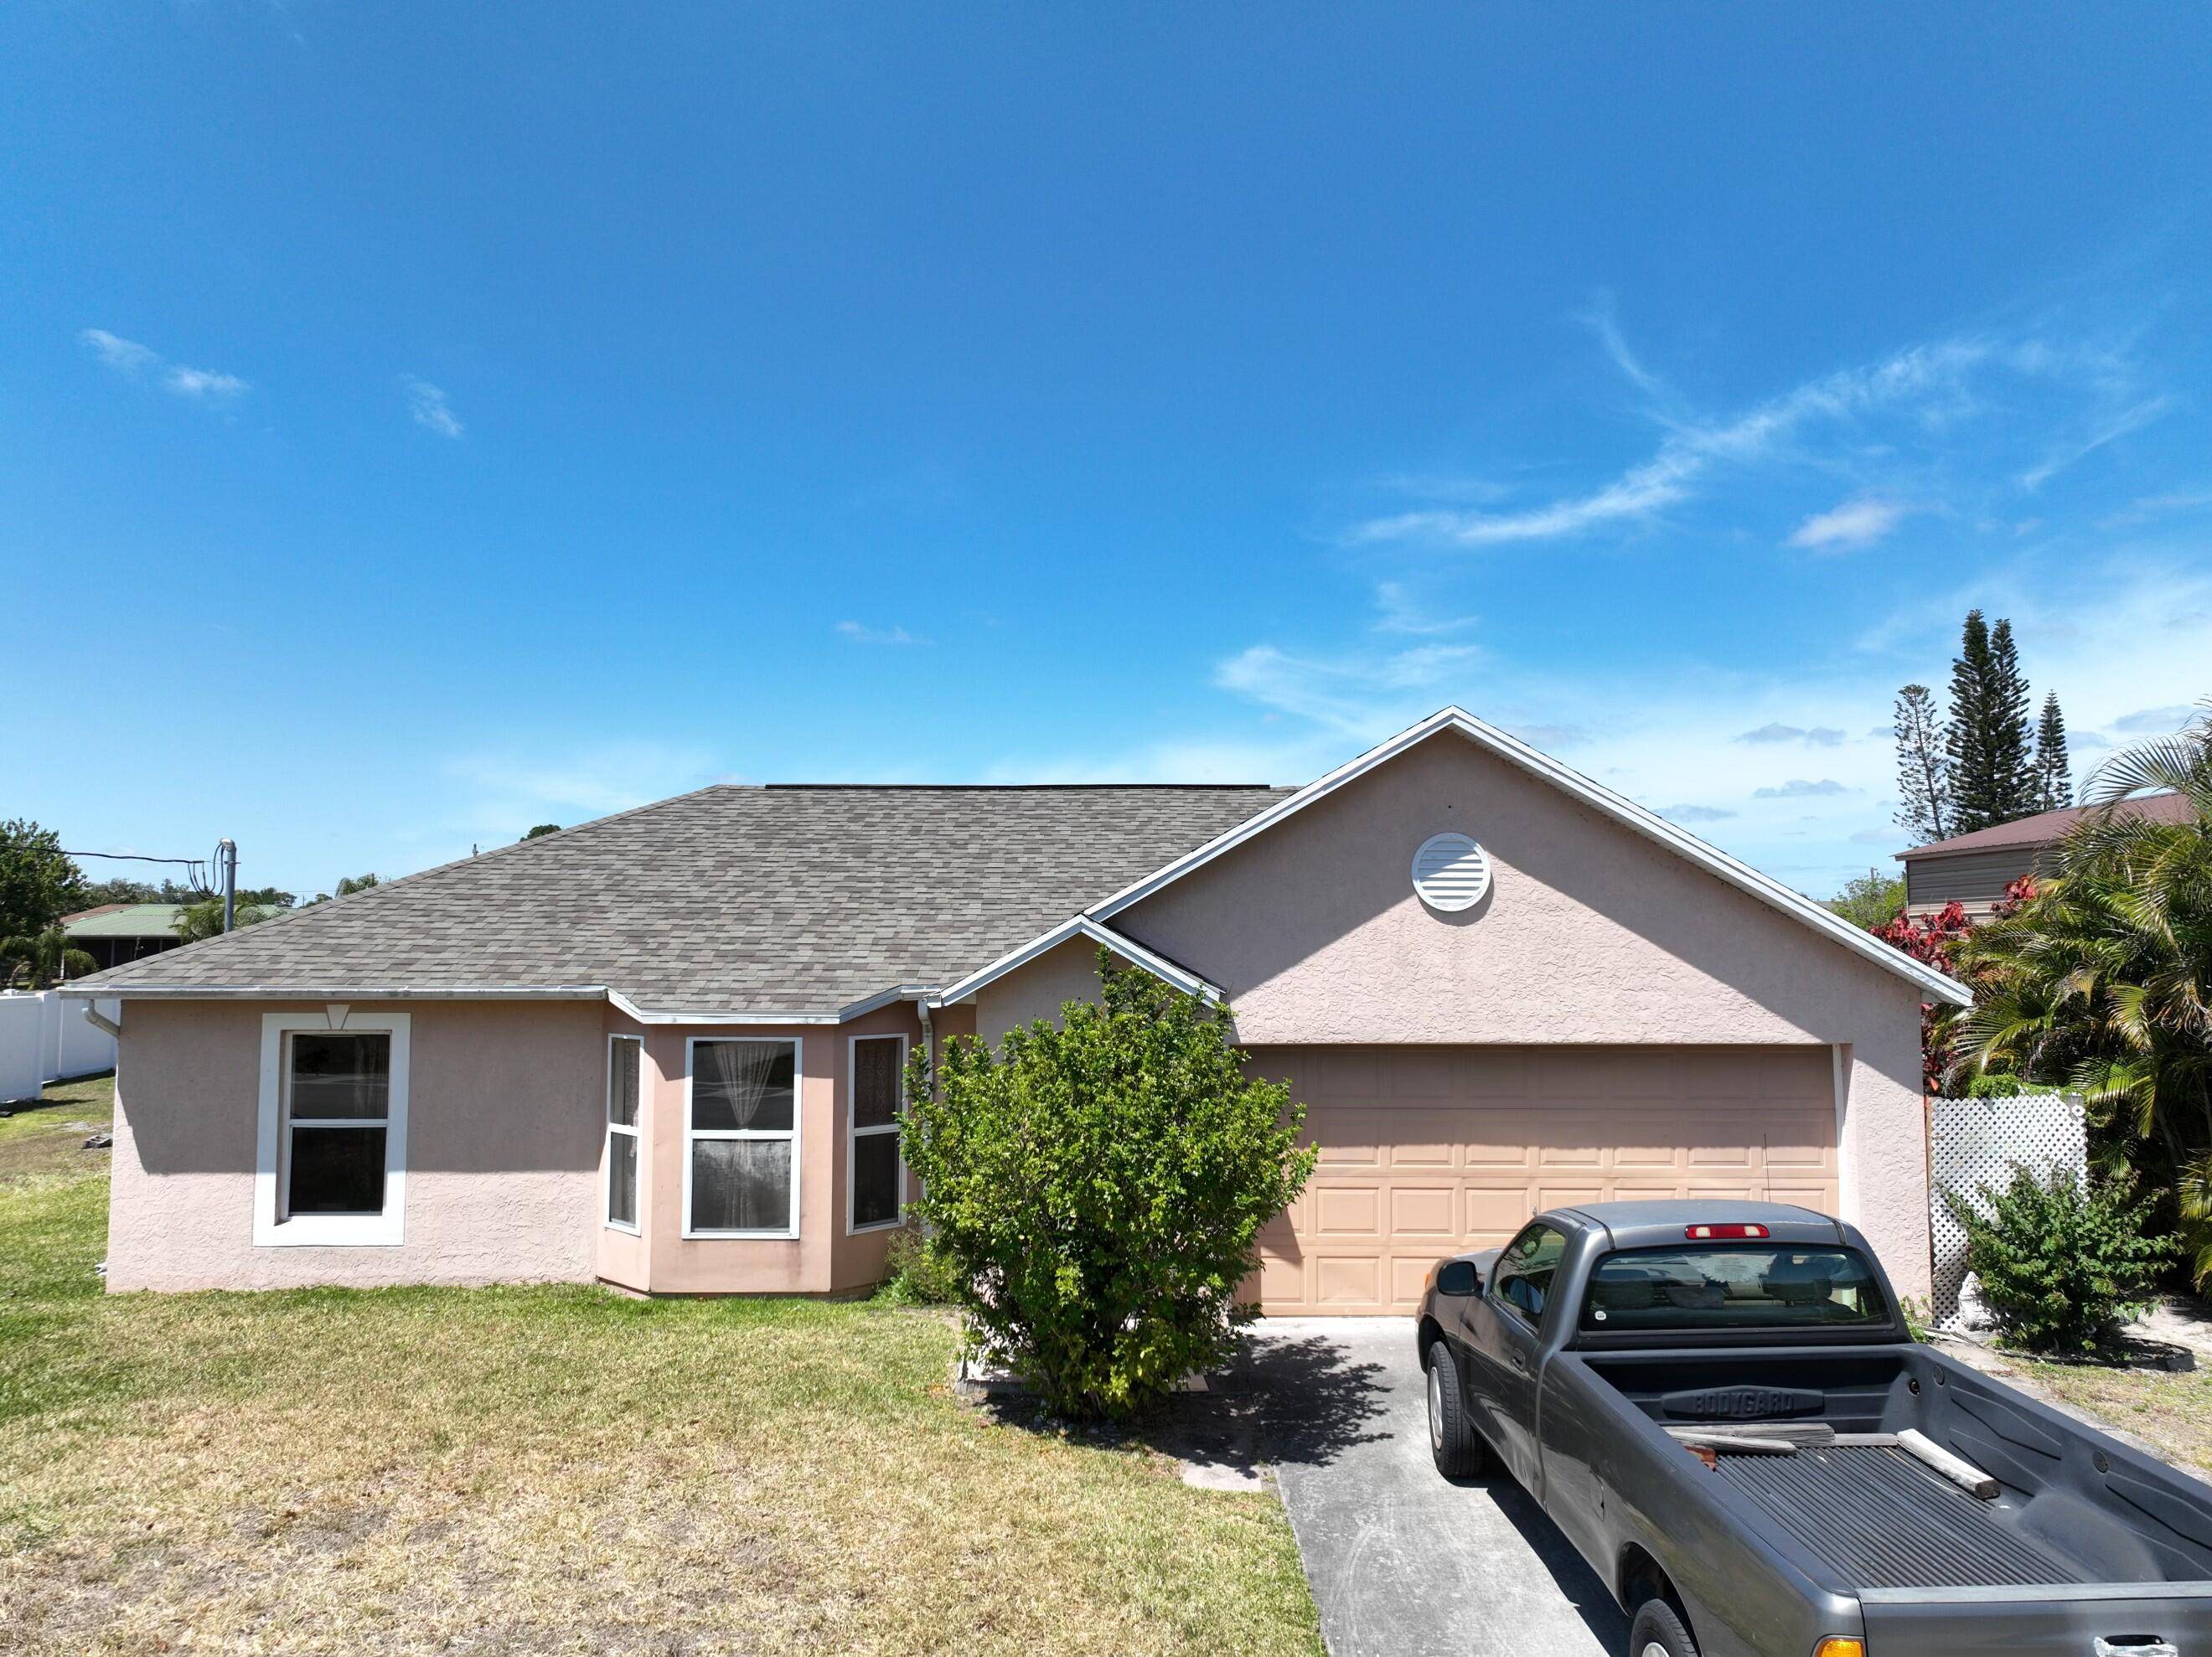 Welcome to this three bedroom, two bathroom residence tucked away in Southwest Port Saint Lucie.